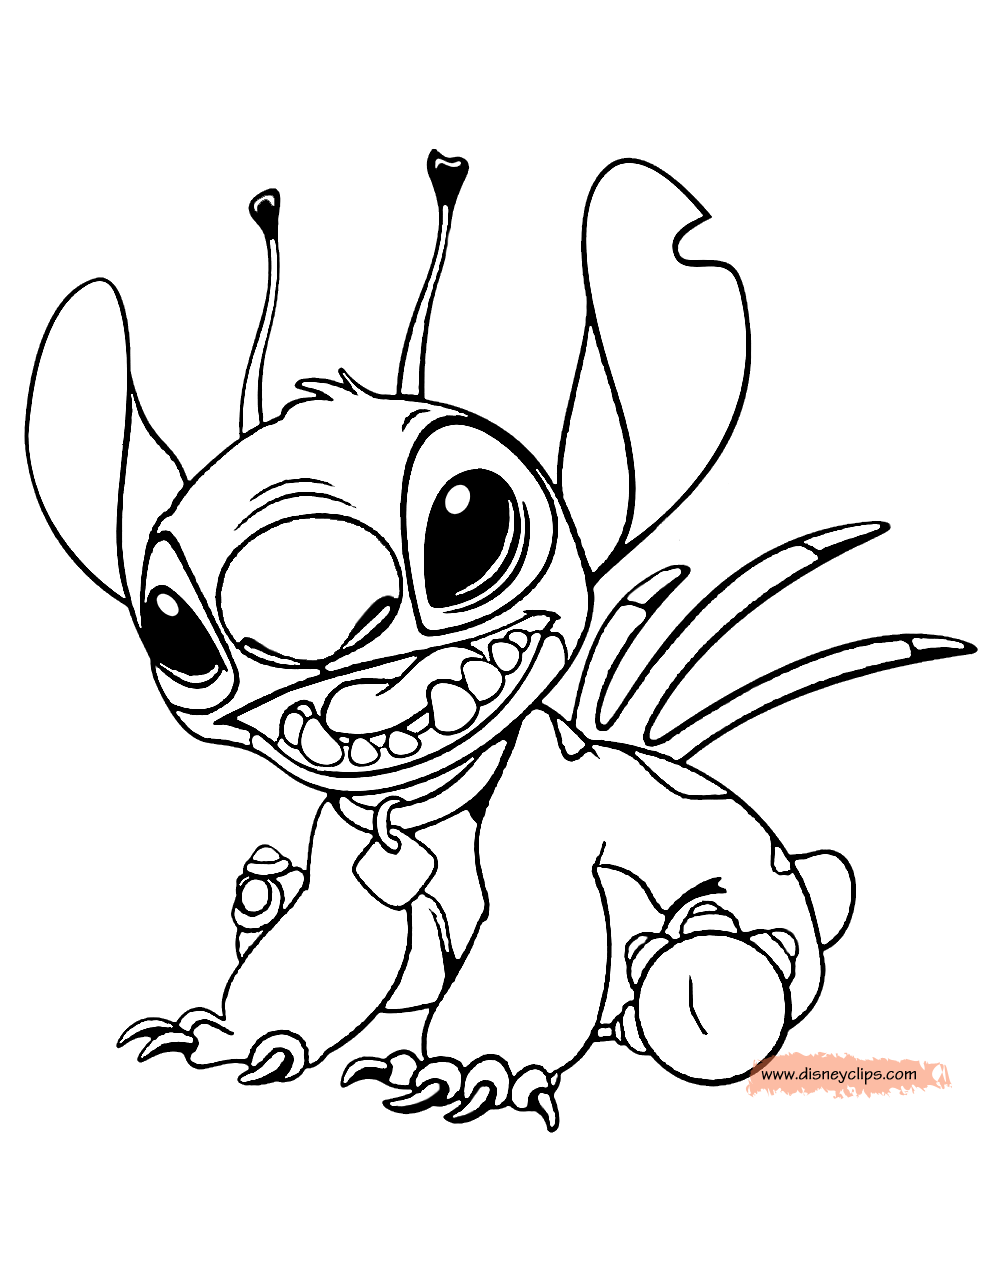 Colouring Pages Disney Stitch Lilo And Stitch Coloring Pages My Xxx Hot Girl